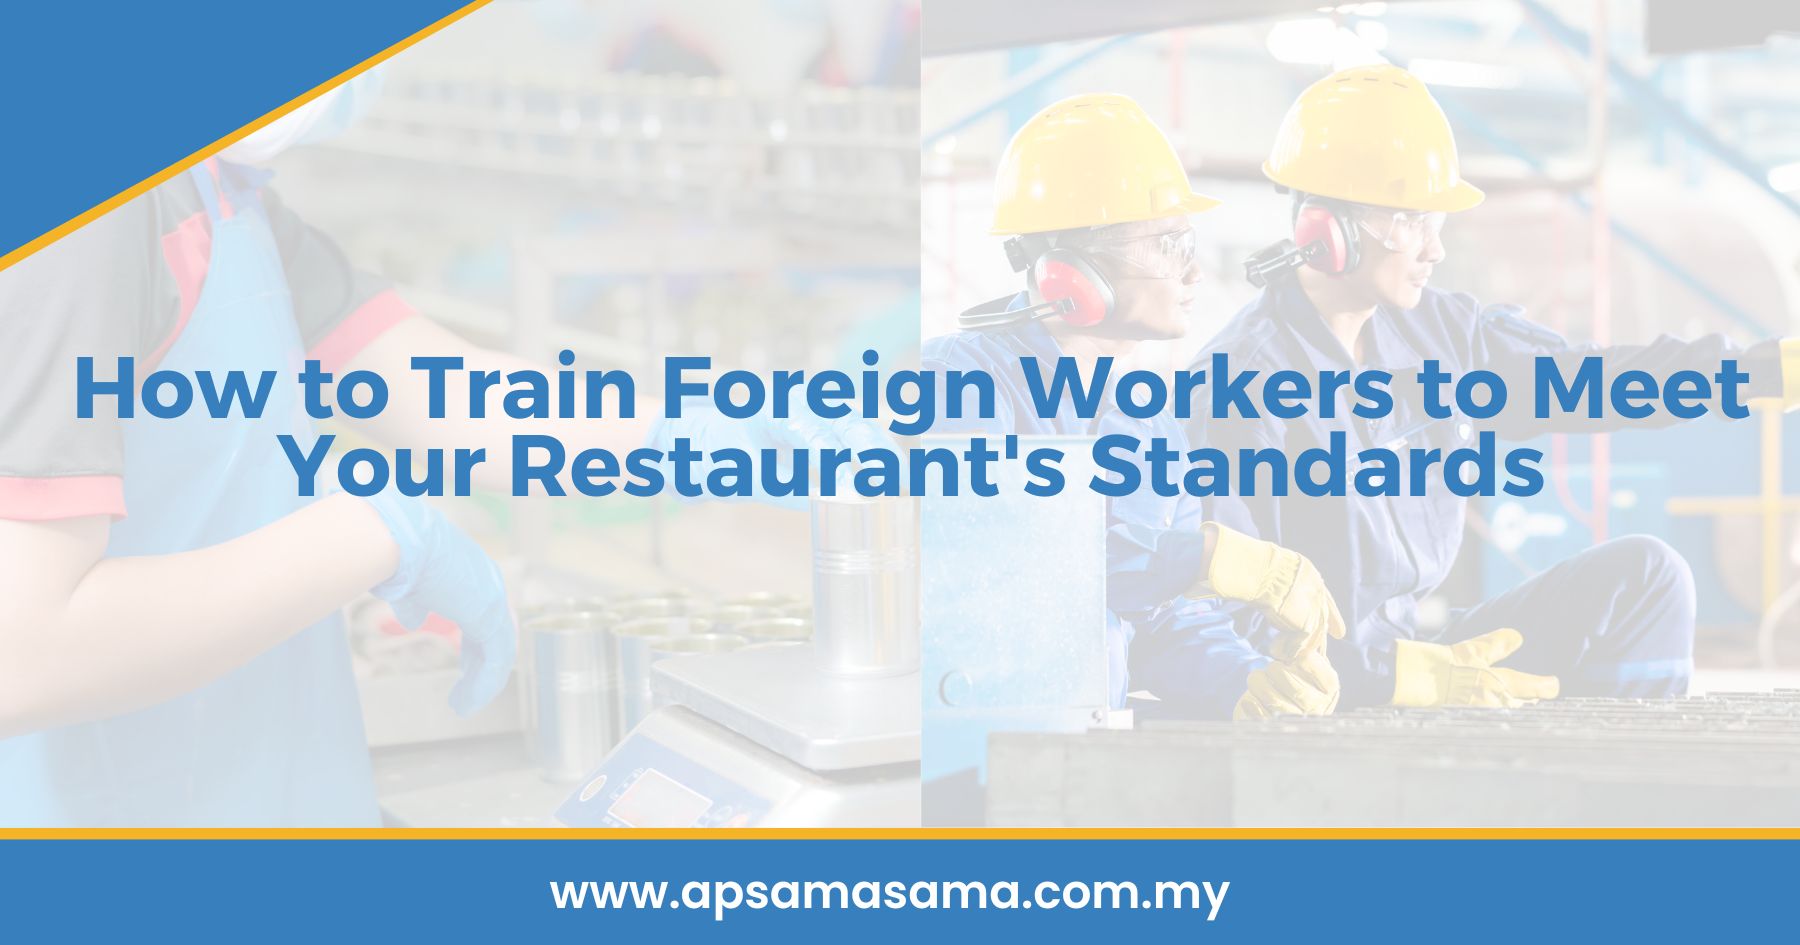 How to Train Foreign Workers to Meet Your Restaurant's Standards